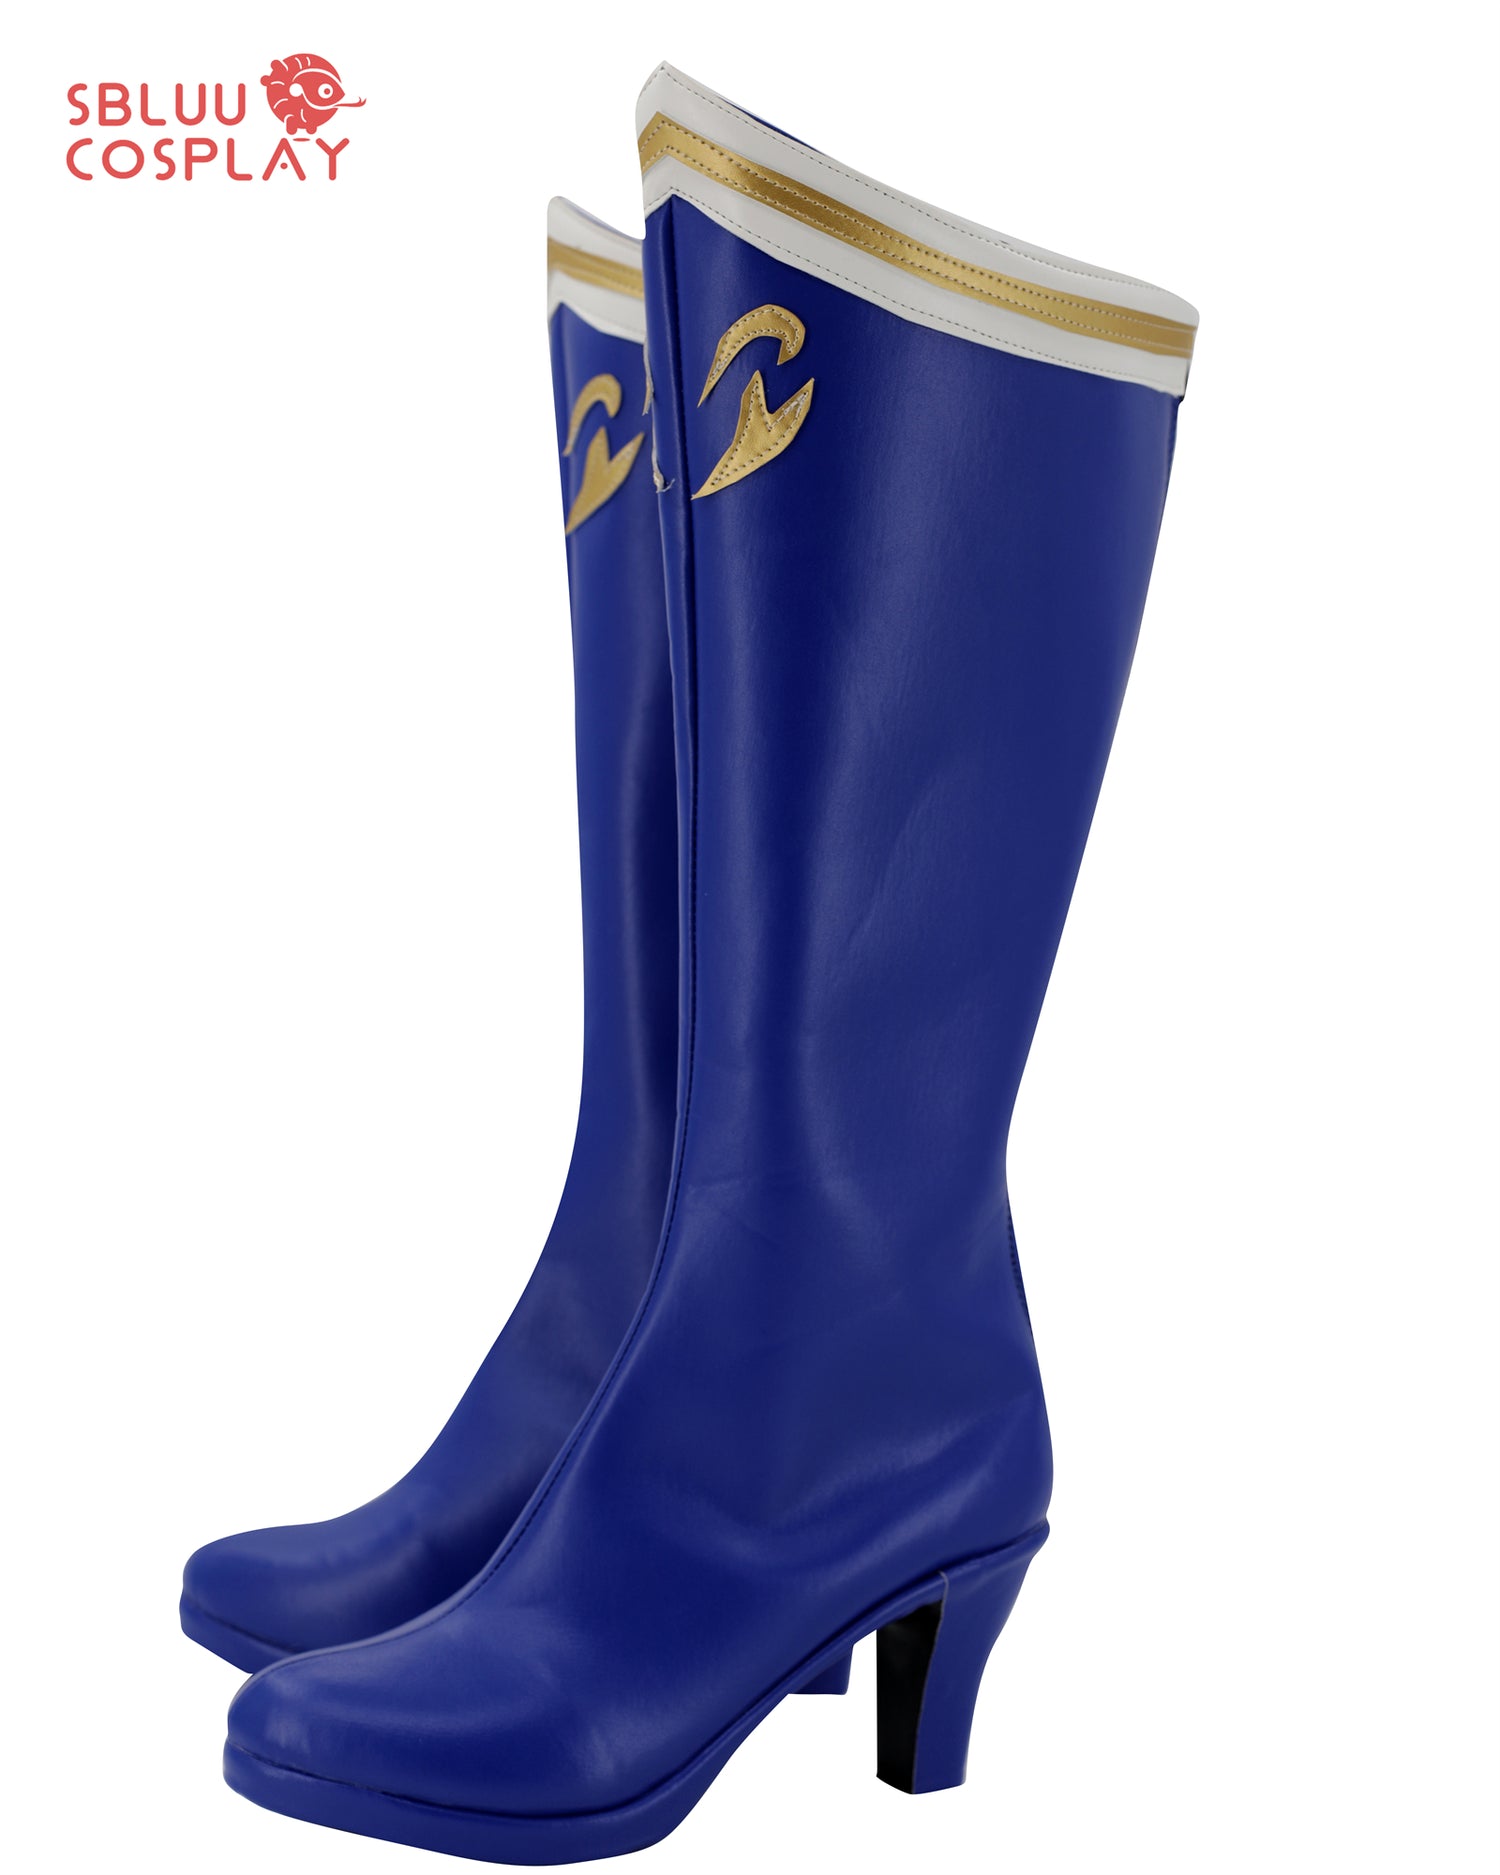 Sailor leather boots